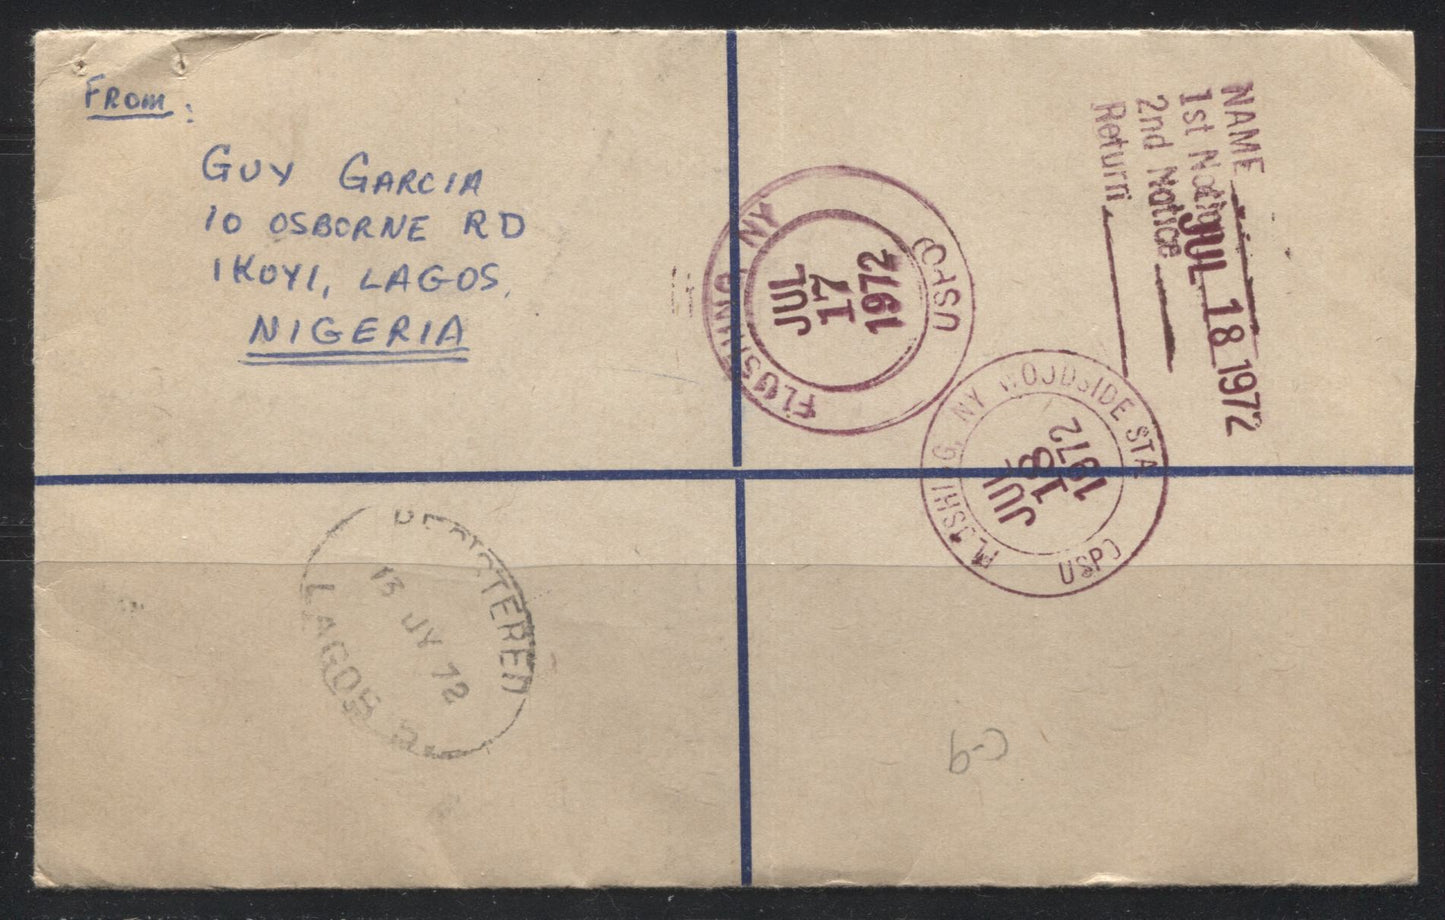 Lot 292 Nigeria SG#224, 276 4d & 3/- Multicoloured Leopards and Road Junction, 1965-1972 Wildlife Definitive Issue & Nigeria Drives Right Issue, A VF 1972 4/5d Registered Airmail Cover to USA On 9d Registered Envelope, Ikoy Registered Boxed Handstamp